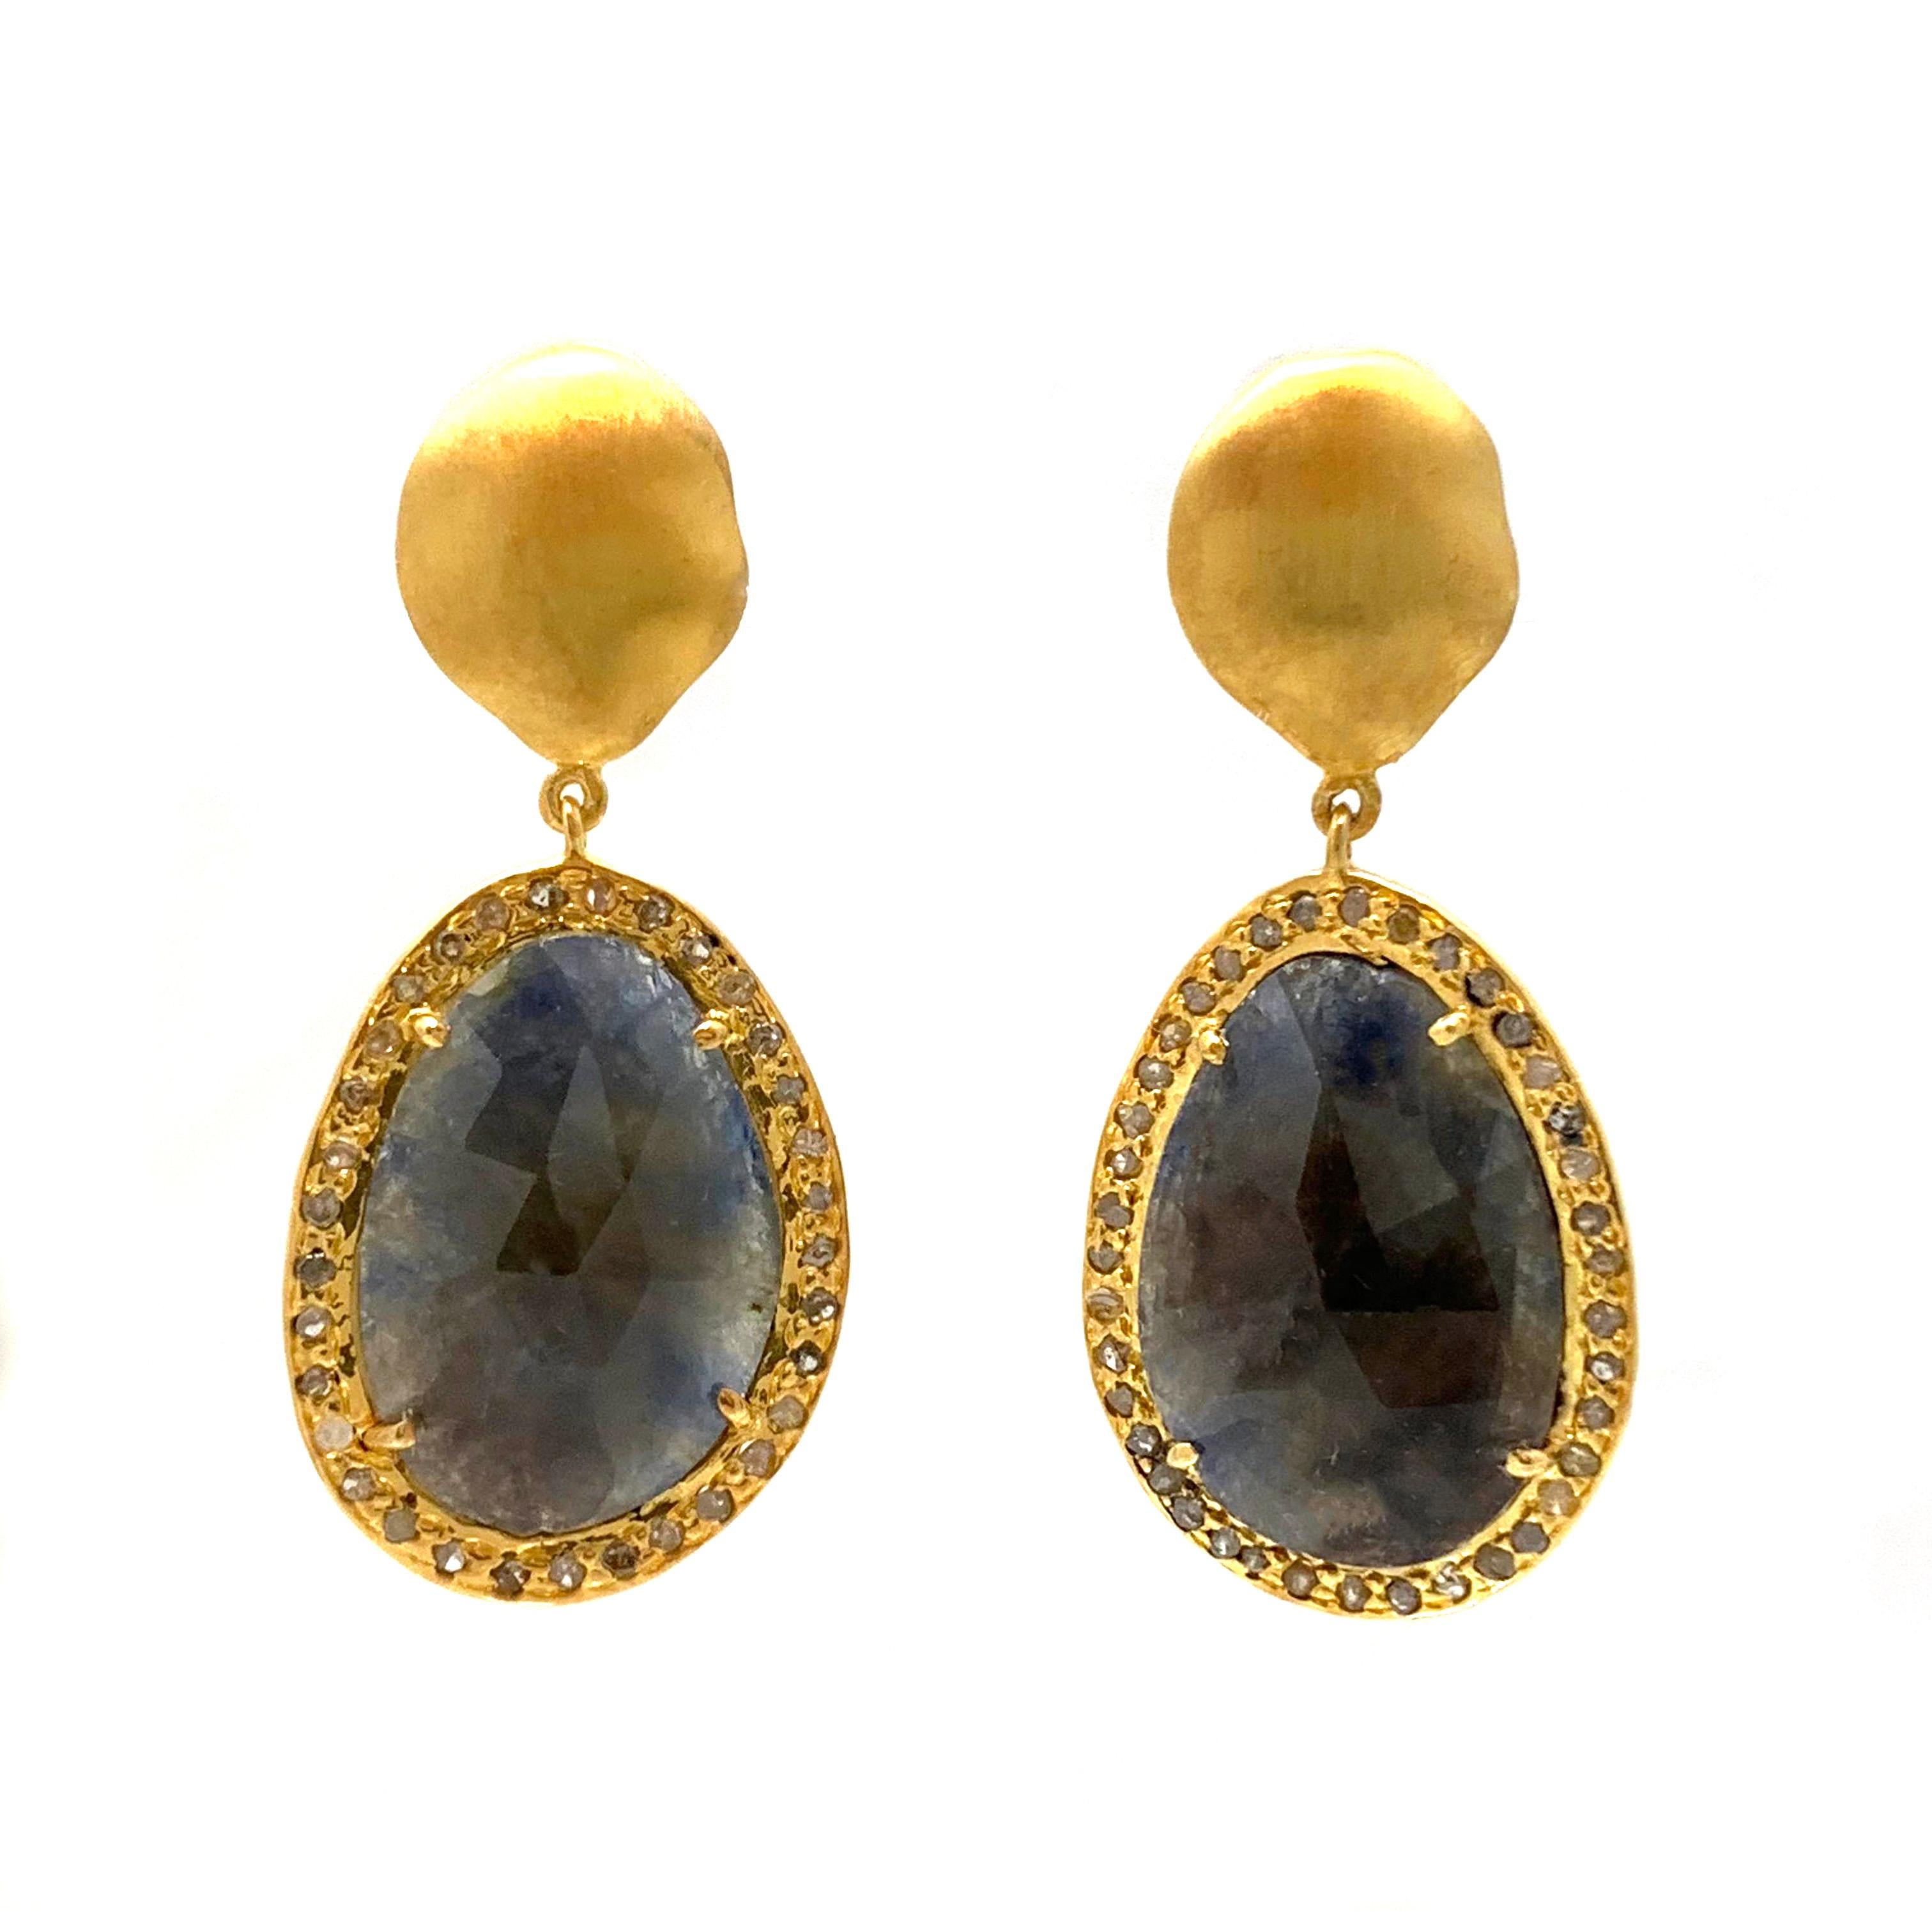 Natural Sapphire with Rough Diamond Drop Vermeil Earrings

These beautiful pair of one of a kind earrings feature a pair of sparkly fancy-shape rose-cut natural Indian sapphire, surrounded with rounds rough diamond, hand-set in sterling silver with